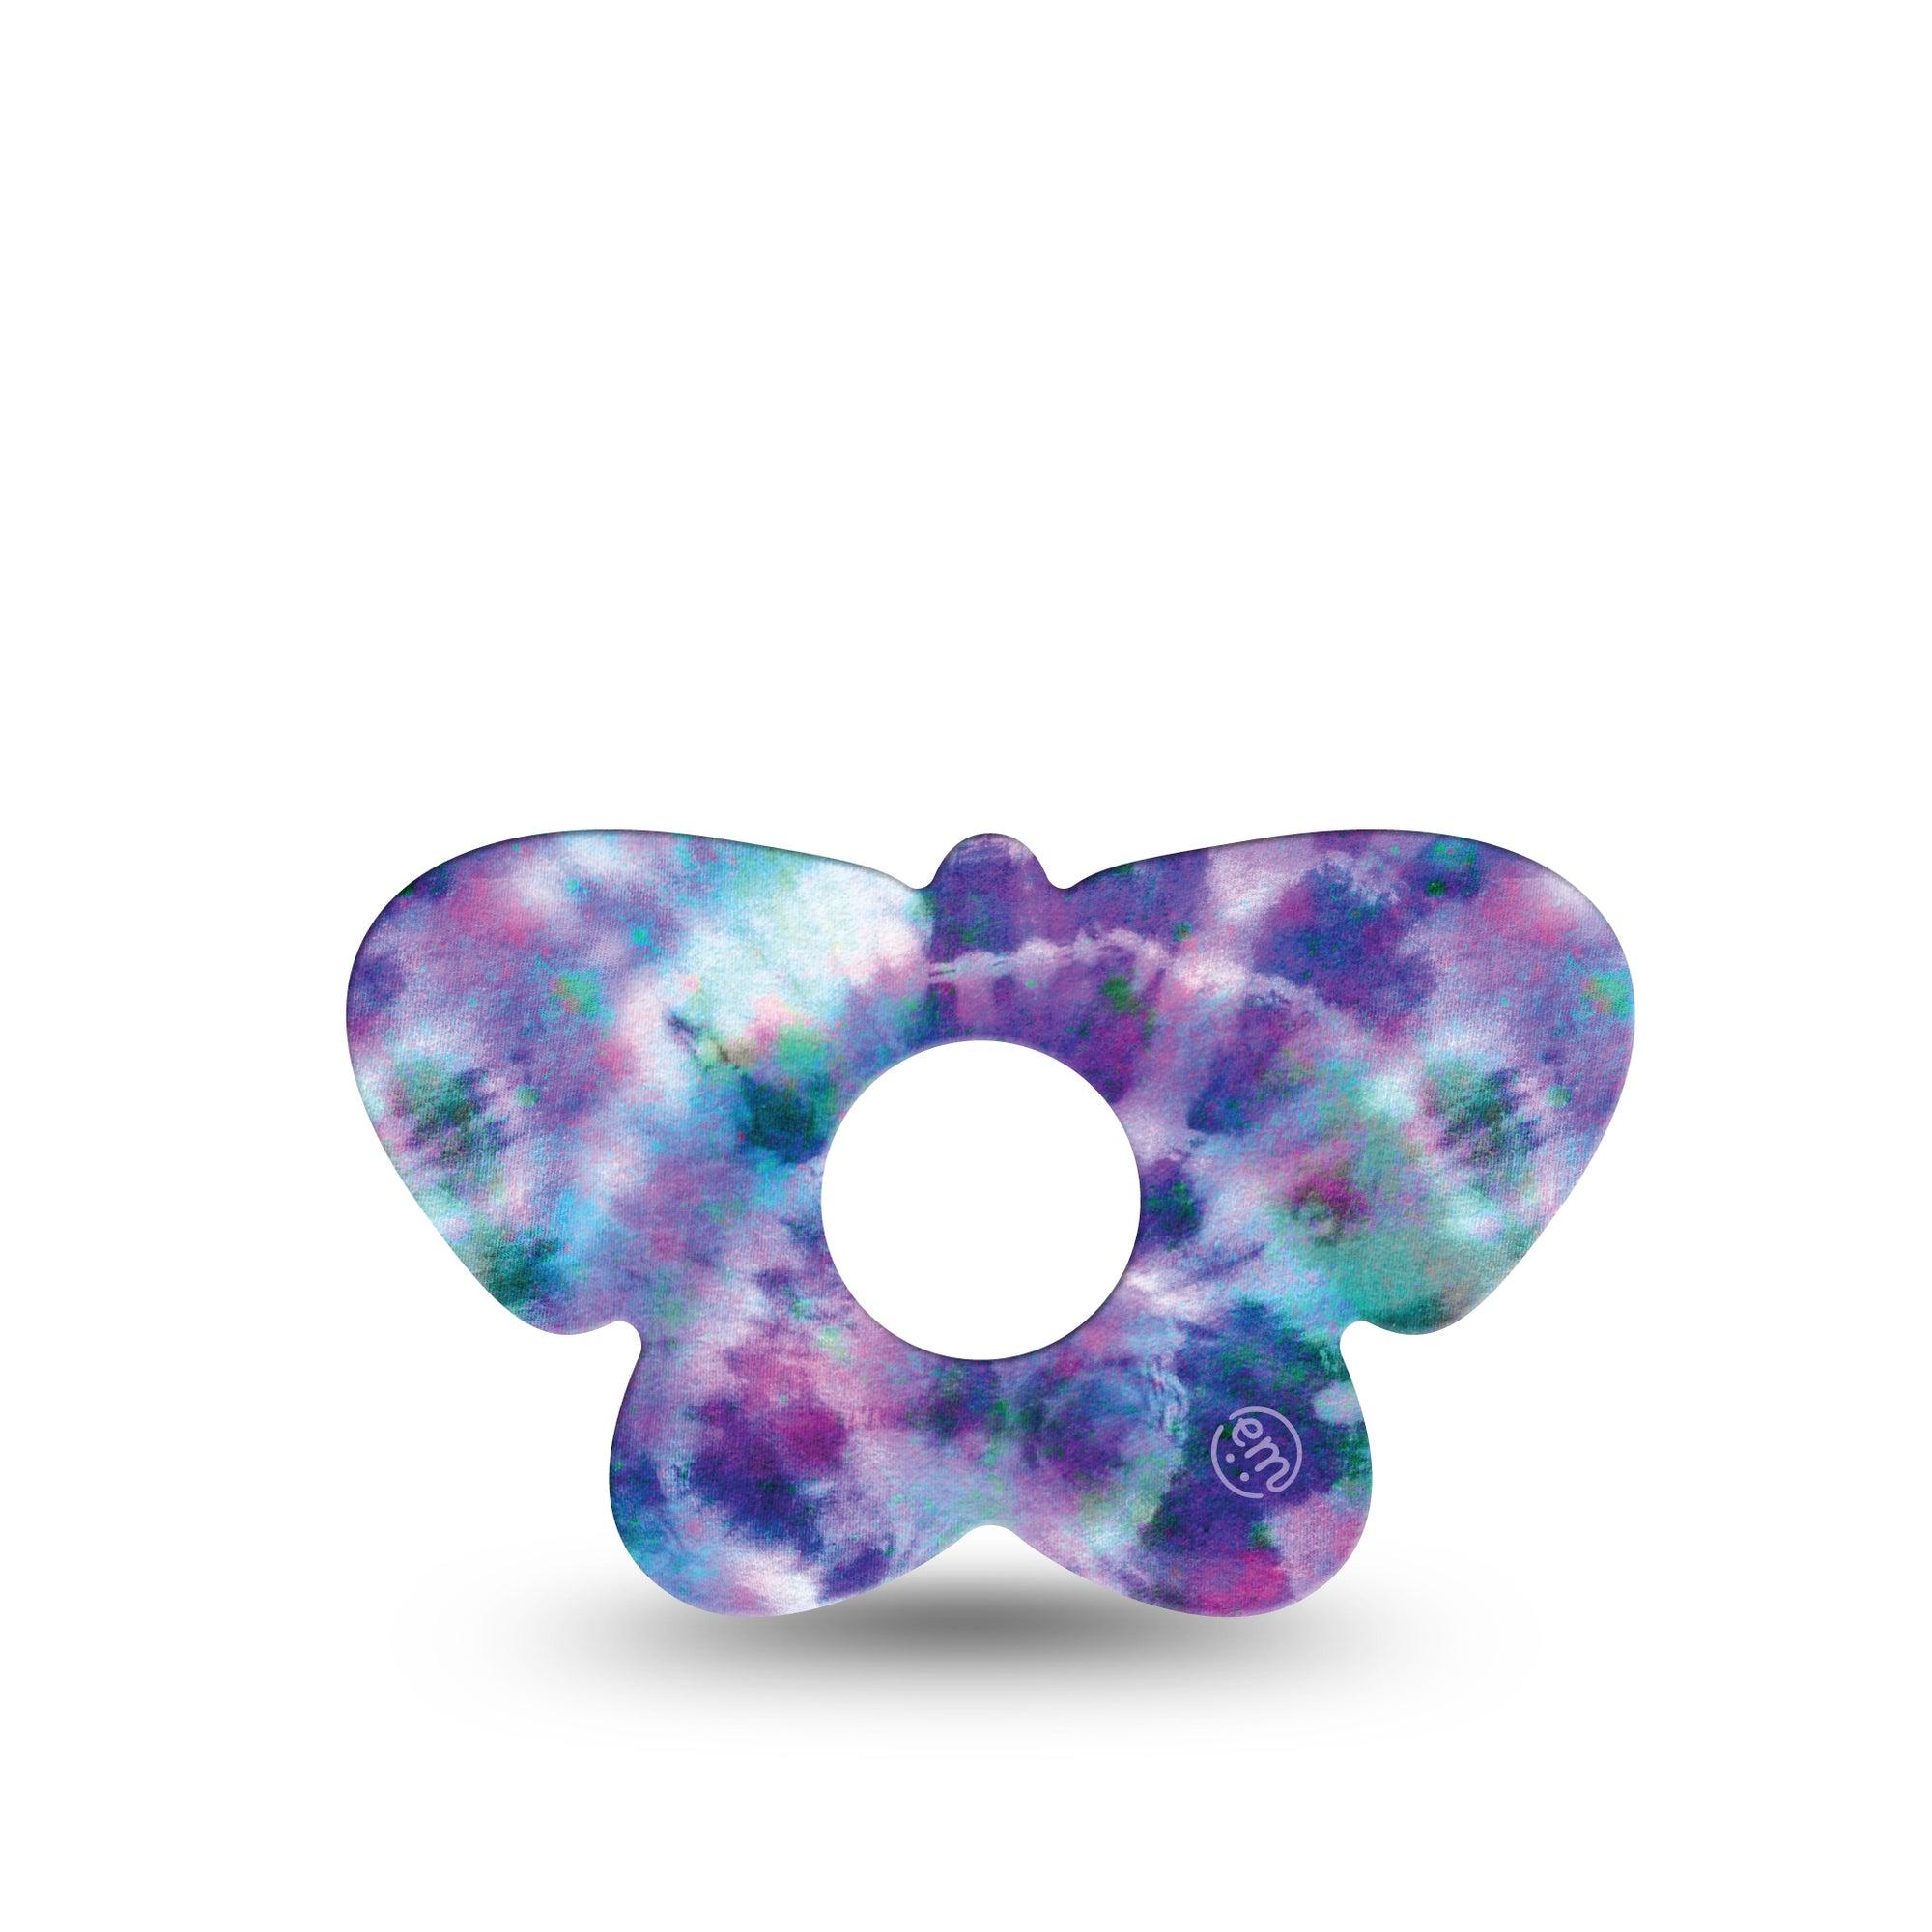 ExpressionMed Purple Tie Dye Butterfly Libre 3 Tape, Single, Colored Dye Themed, CGM Overlay Patch Design